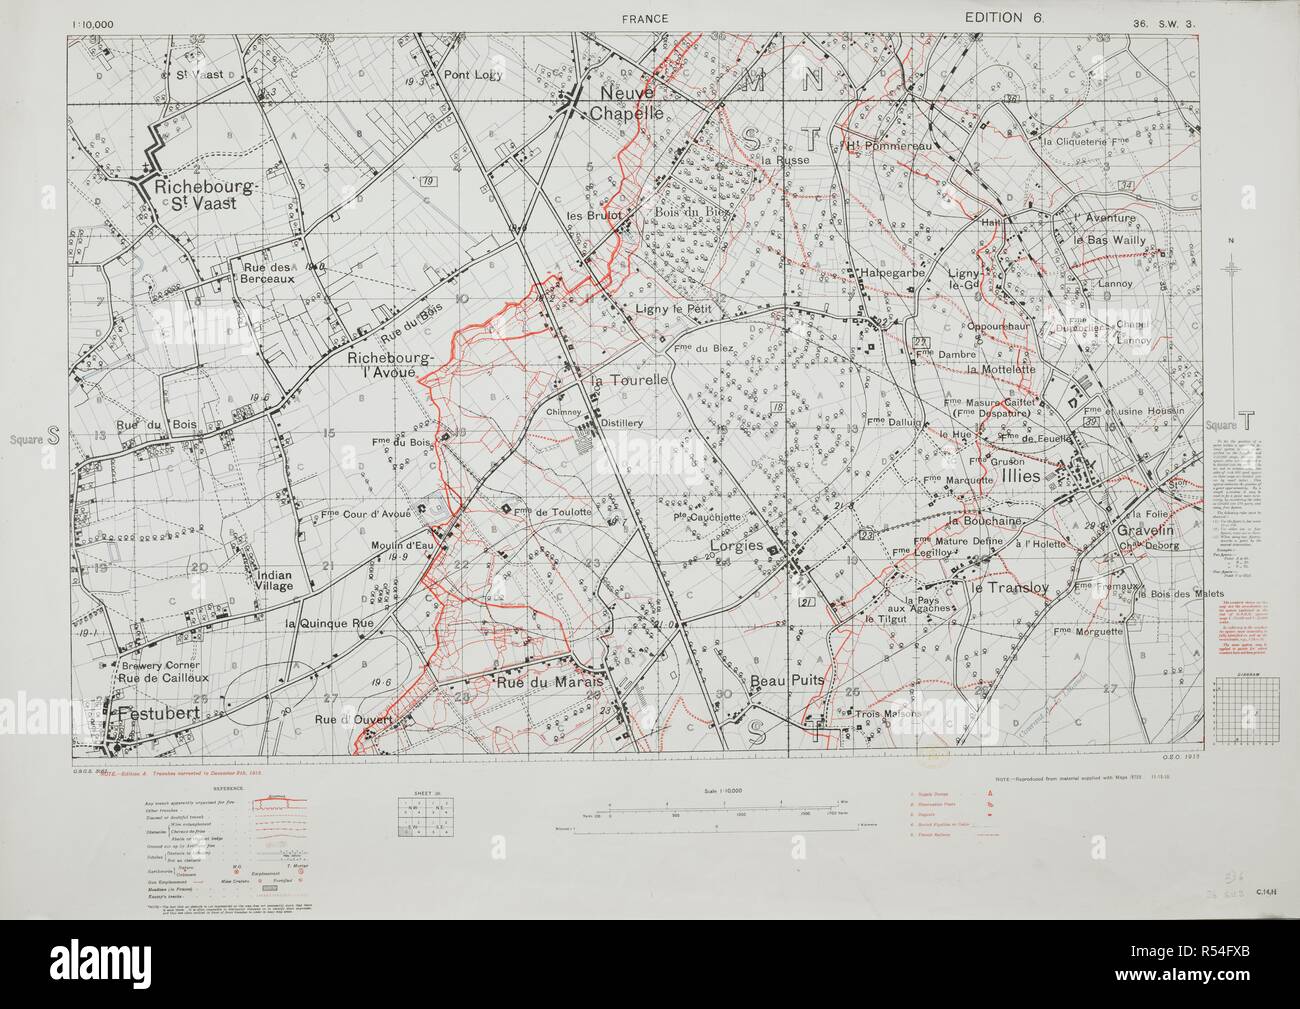 Map of the First World War, showing Neuve Chapelle, France. In red, 'trenches corrected to December, 1915'. Trench Maps [of the Battle Front in France and Belgium, showing trenches, wire entanglement, etc. With a Glossary printed on the back of the sheets]. Scale, 1: 10,000. London, 1915. 800 x 505 mm.; Scale 1: 10 000. Source: Maps.c.14.h. 36 SW 3, edition 6. Stock Photo